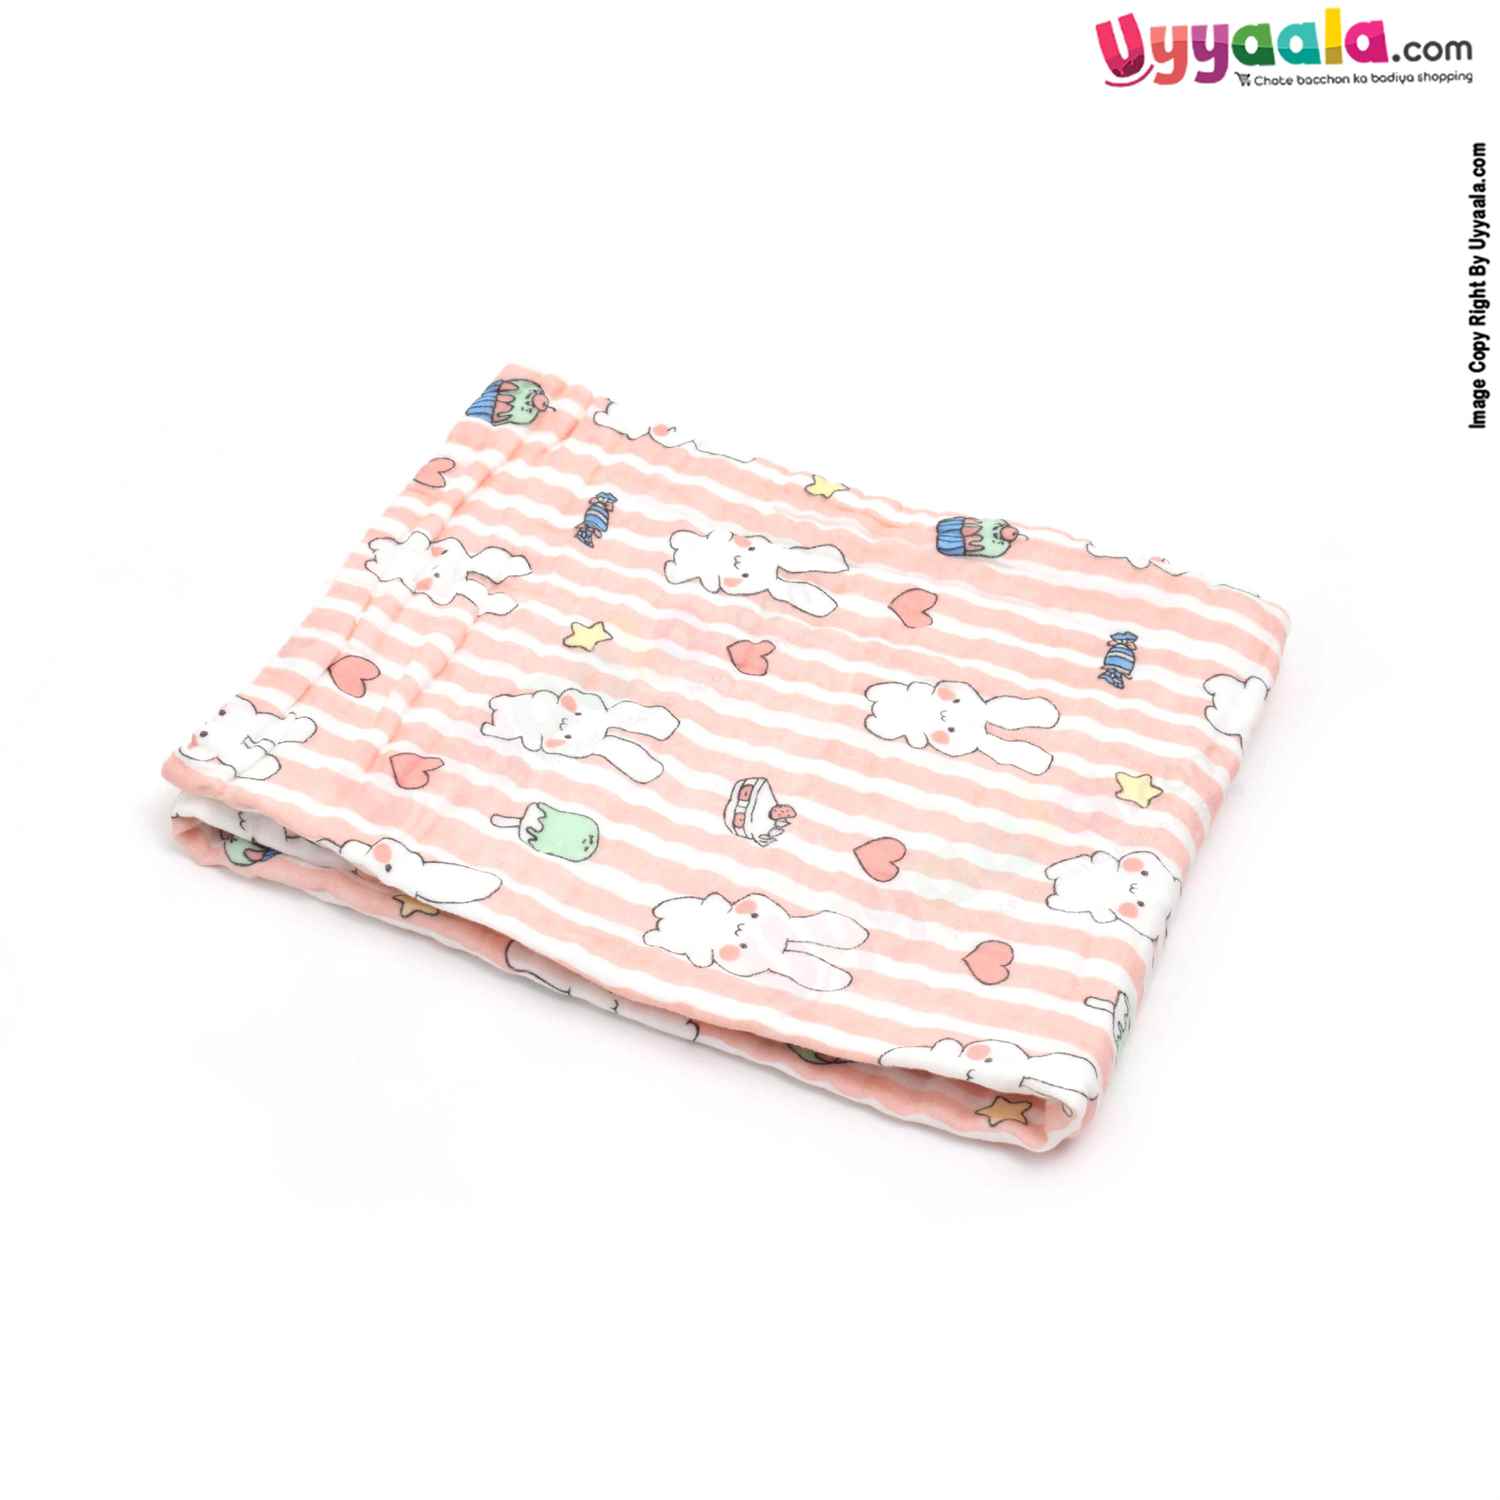 Four Layered Muslin Cotton Towel with Rabbit Print for babies 0+m Age, Size(95*51Cm)-Peach